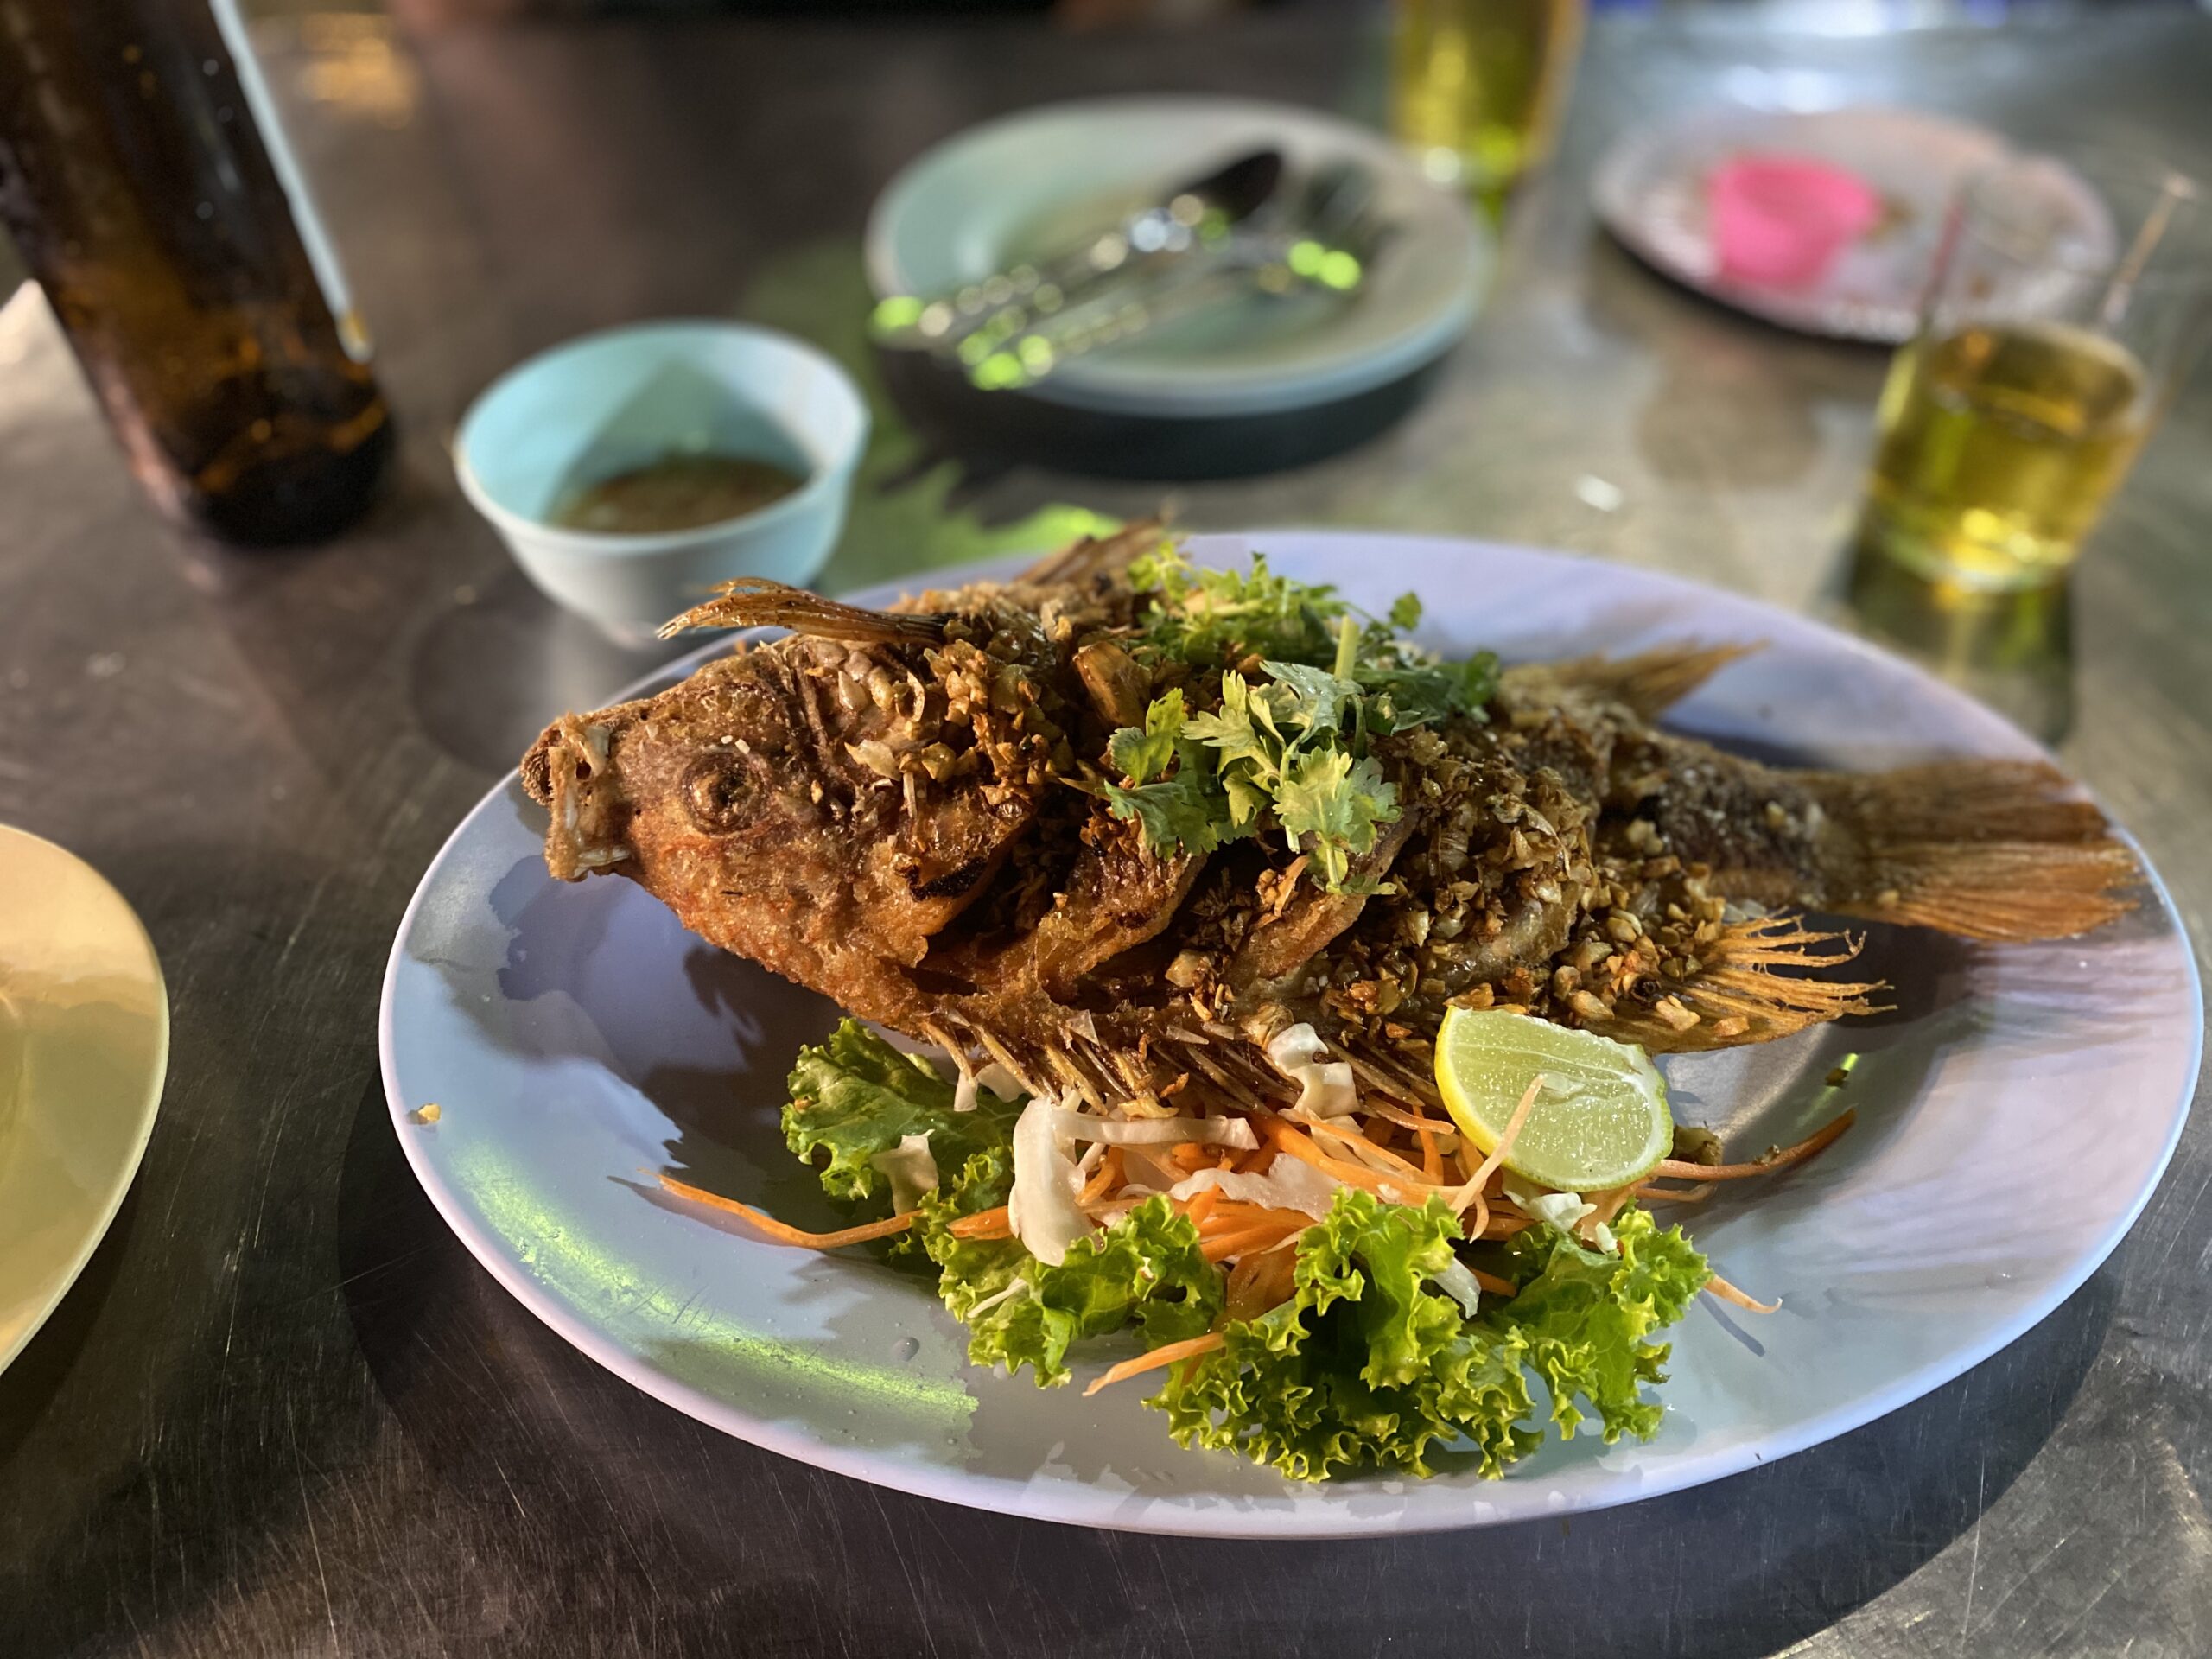 8 amazing dishes you must try in Thailand